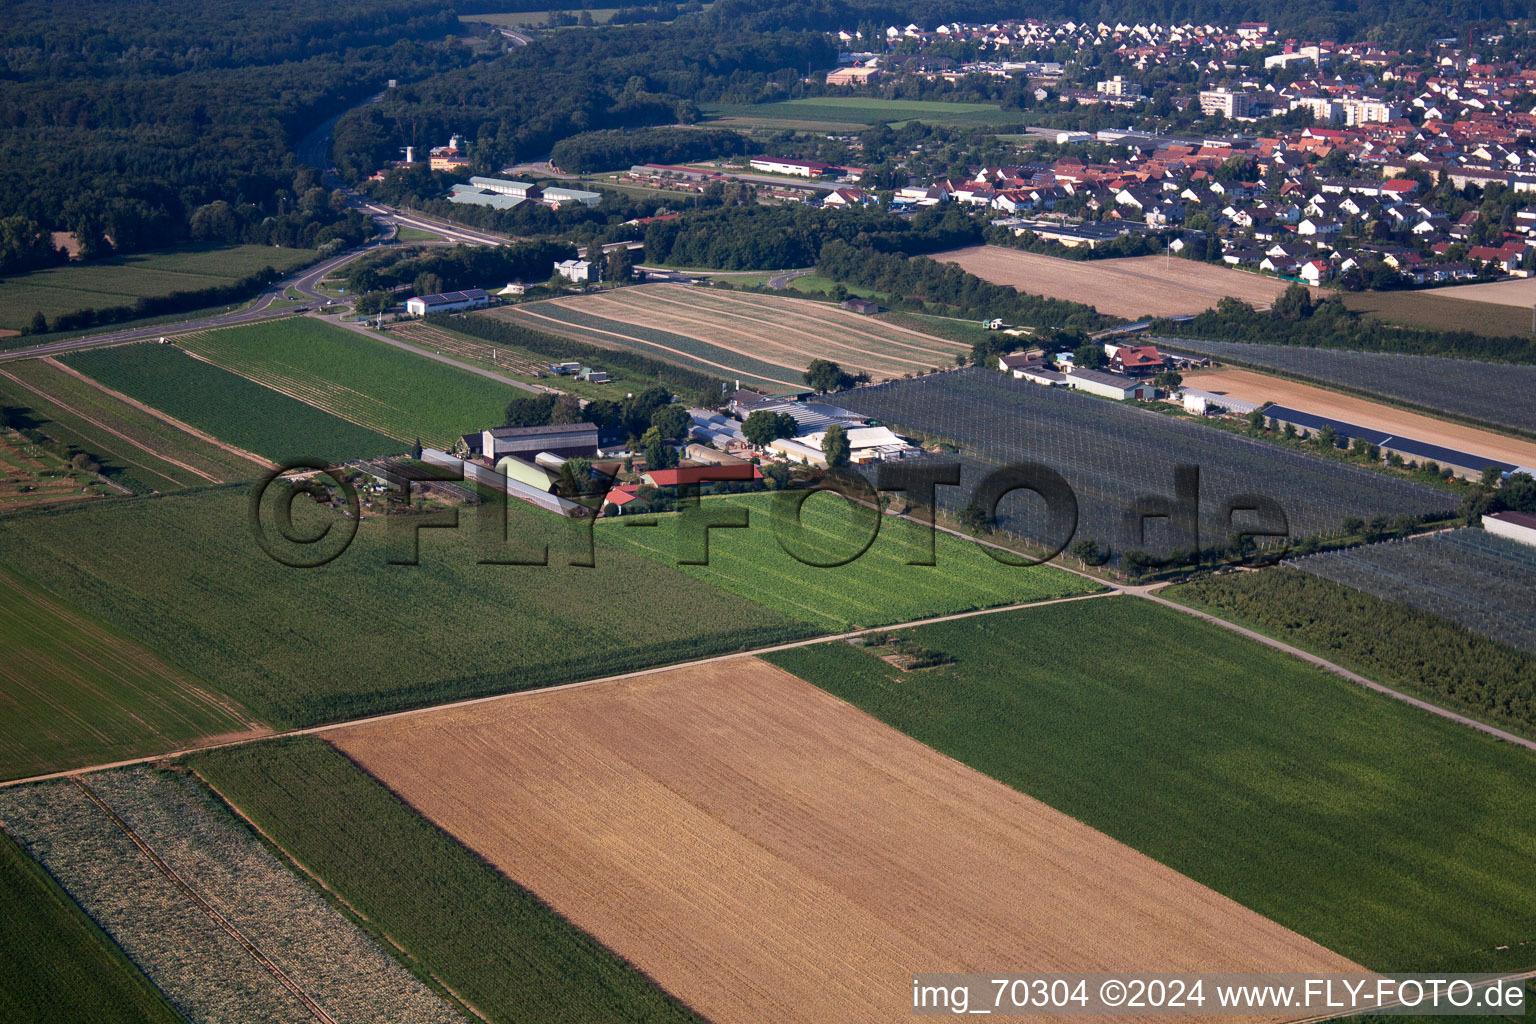 Aerial view of Zapf fruit farm in Kandel in the state Rhineland-Palatinate, Germany